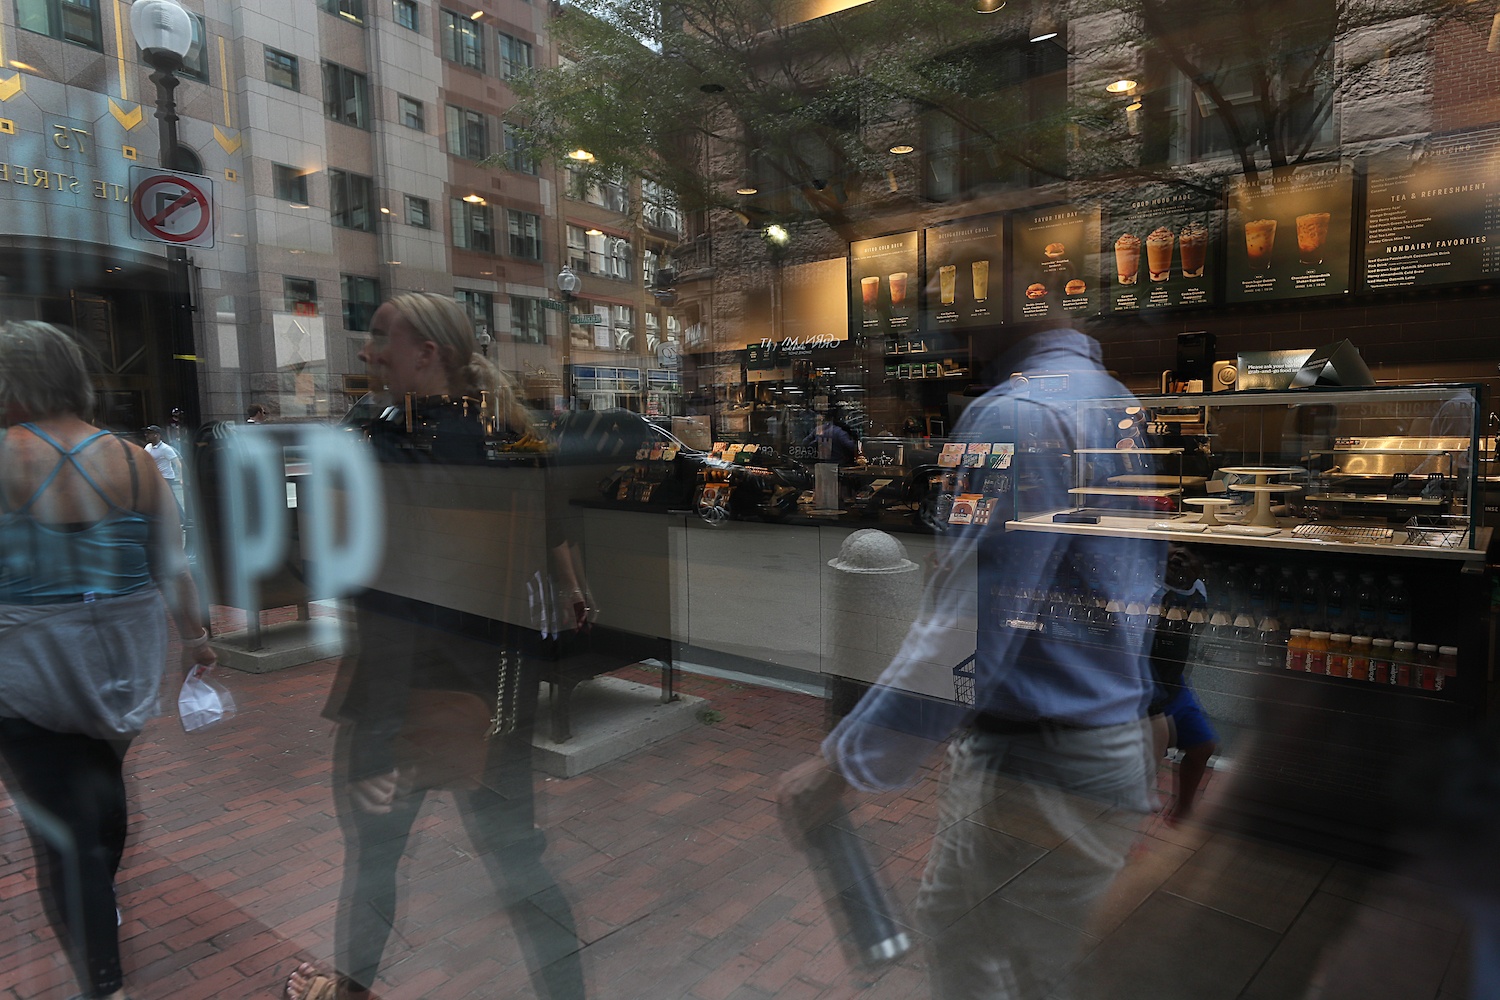 Workers and tourists are reflected in the window of a temporarily closed Starbucks on State Street in Boston on August 9, 2021.